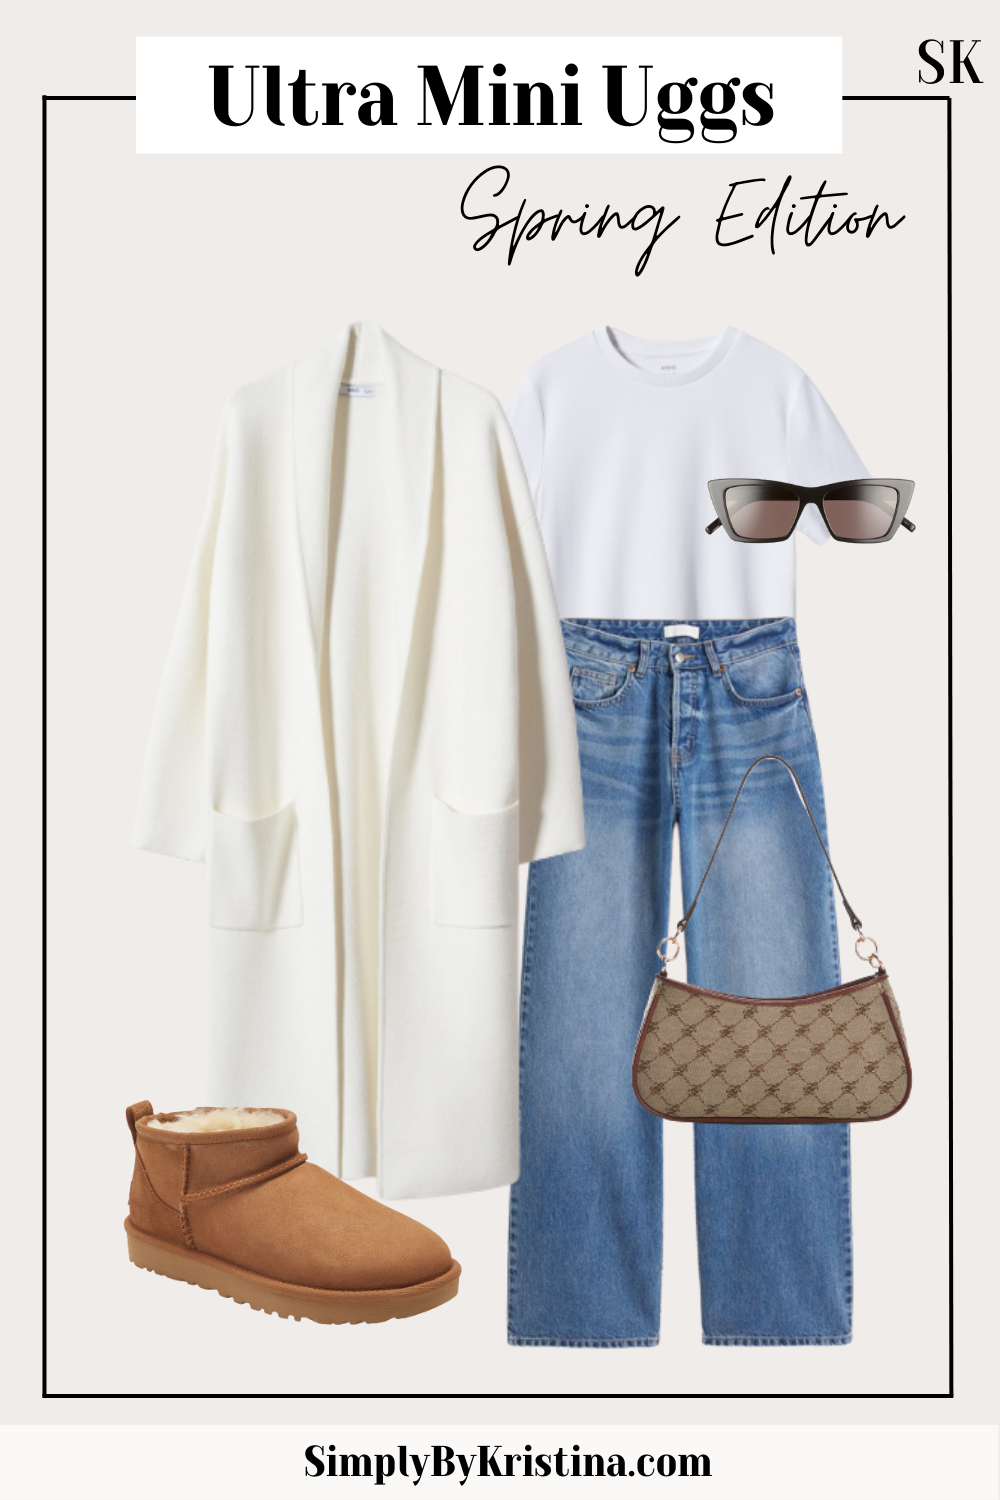 What To Wear With Ultra Mini Ugg Boots - Spring Edition